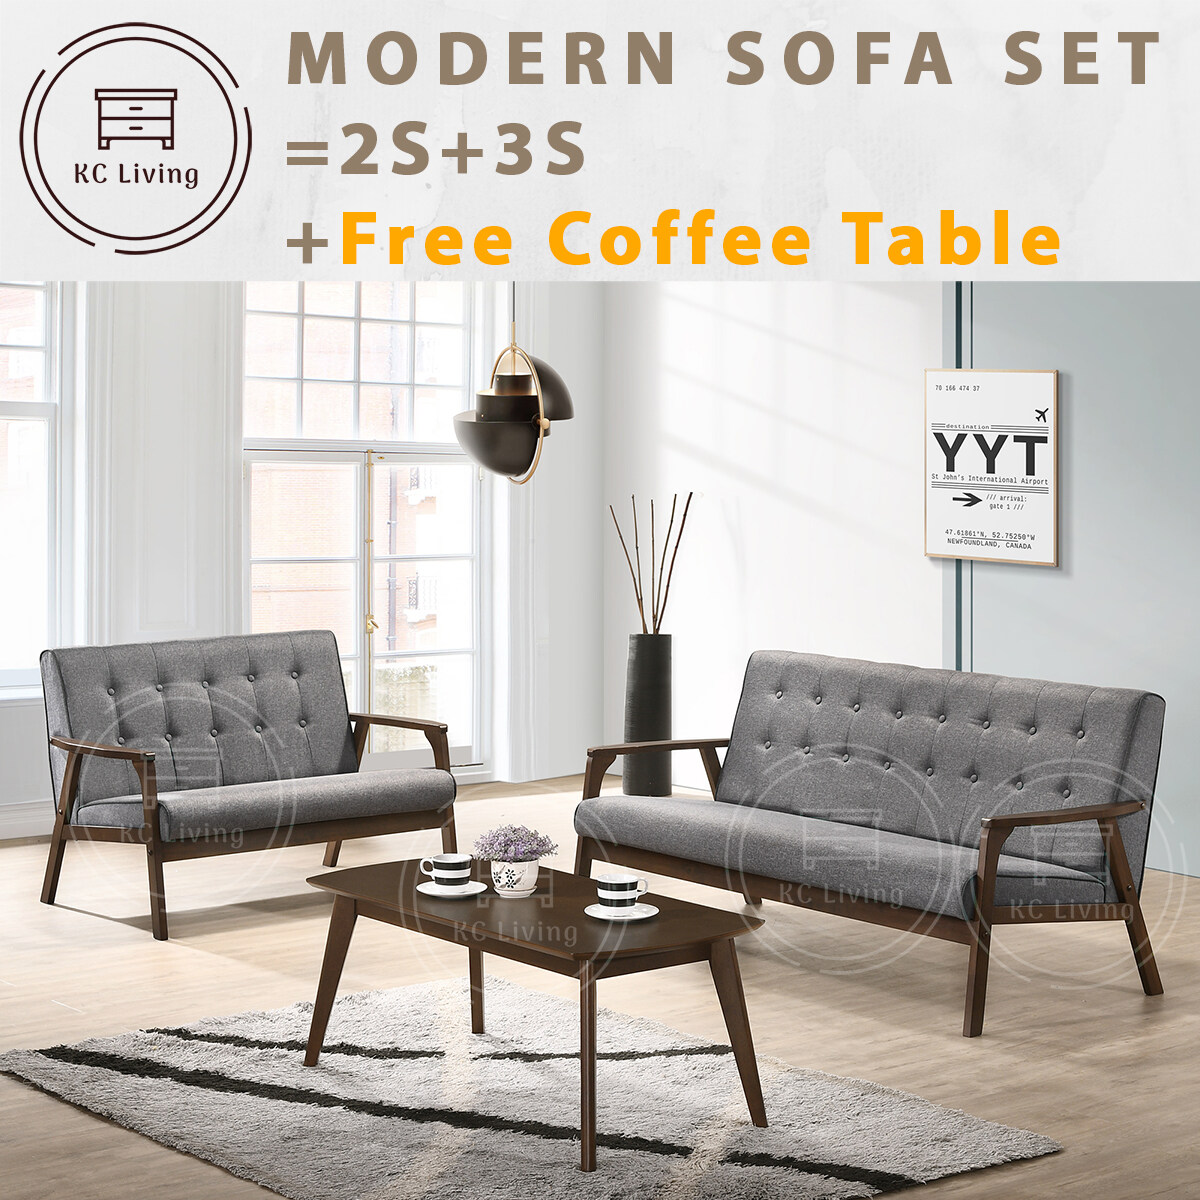 [KCL] Modern Sofa Set / 2 Seater & 3 Seater & Free Coffee Table / Solid Rubber Wood / Grey Fabric